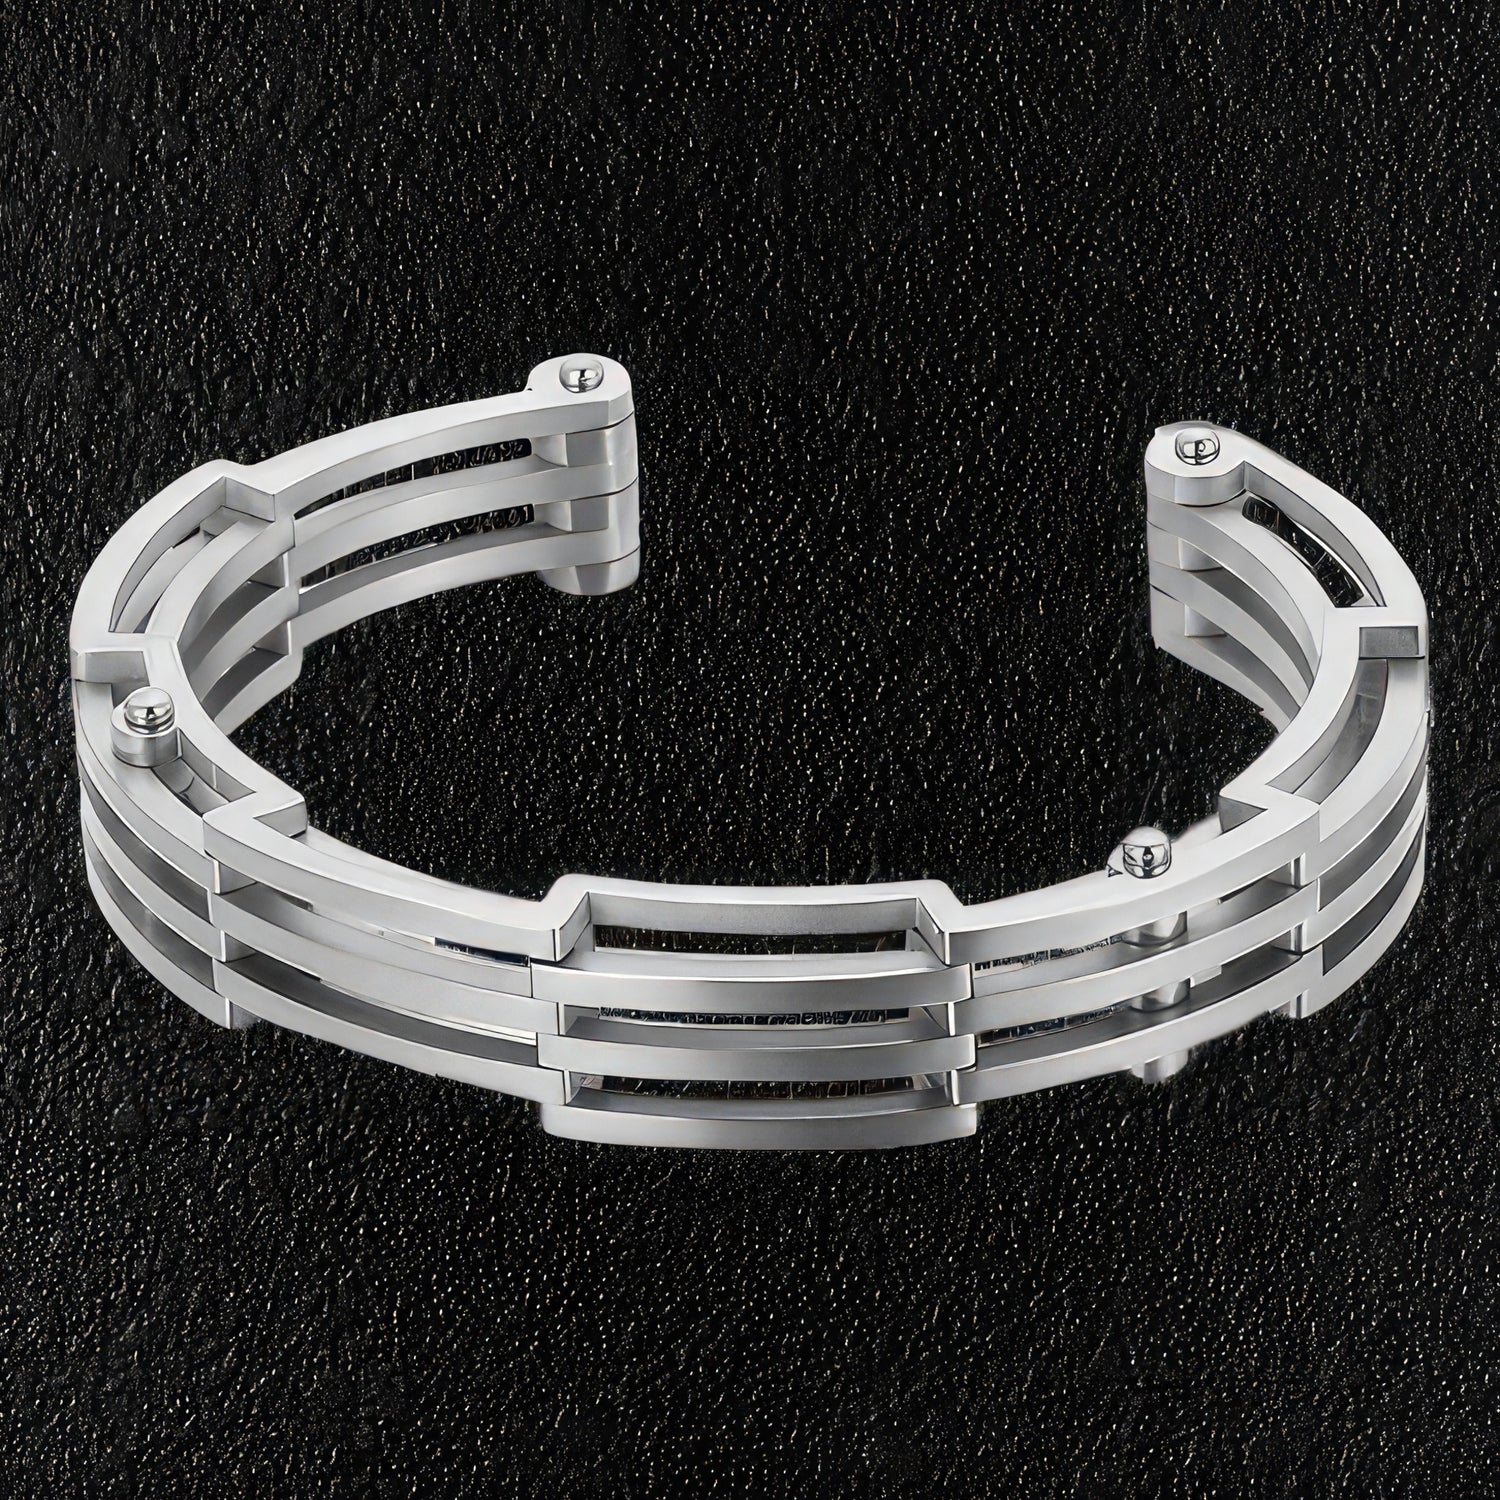 High grade stainless steel grill style wristband.